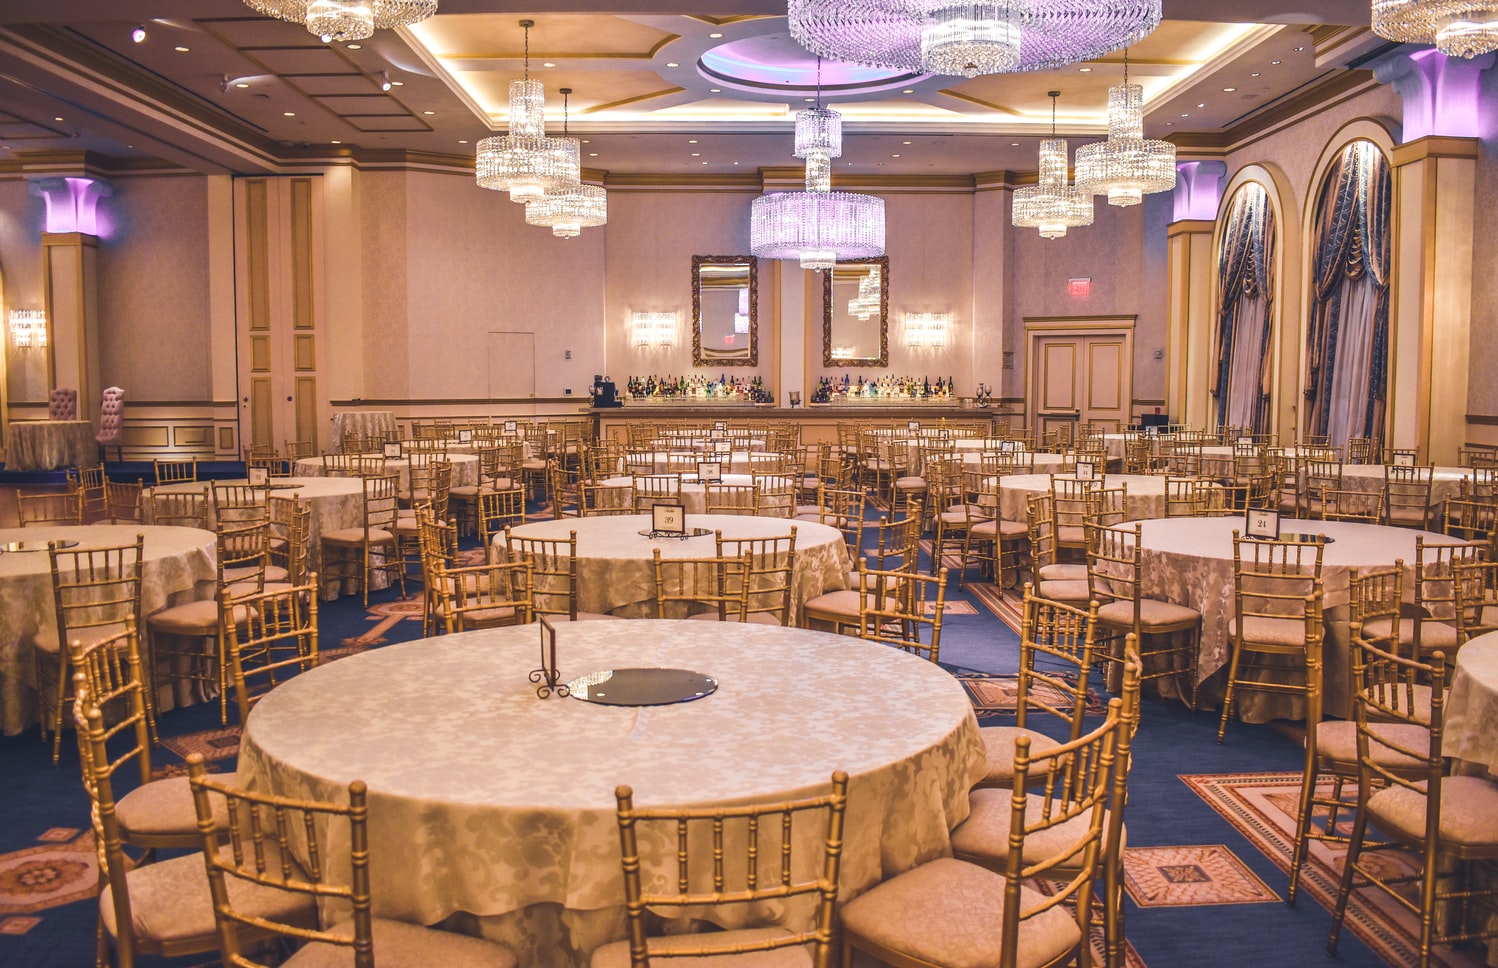 What to Consider When Choosing a Venue for an Event